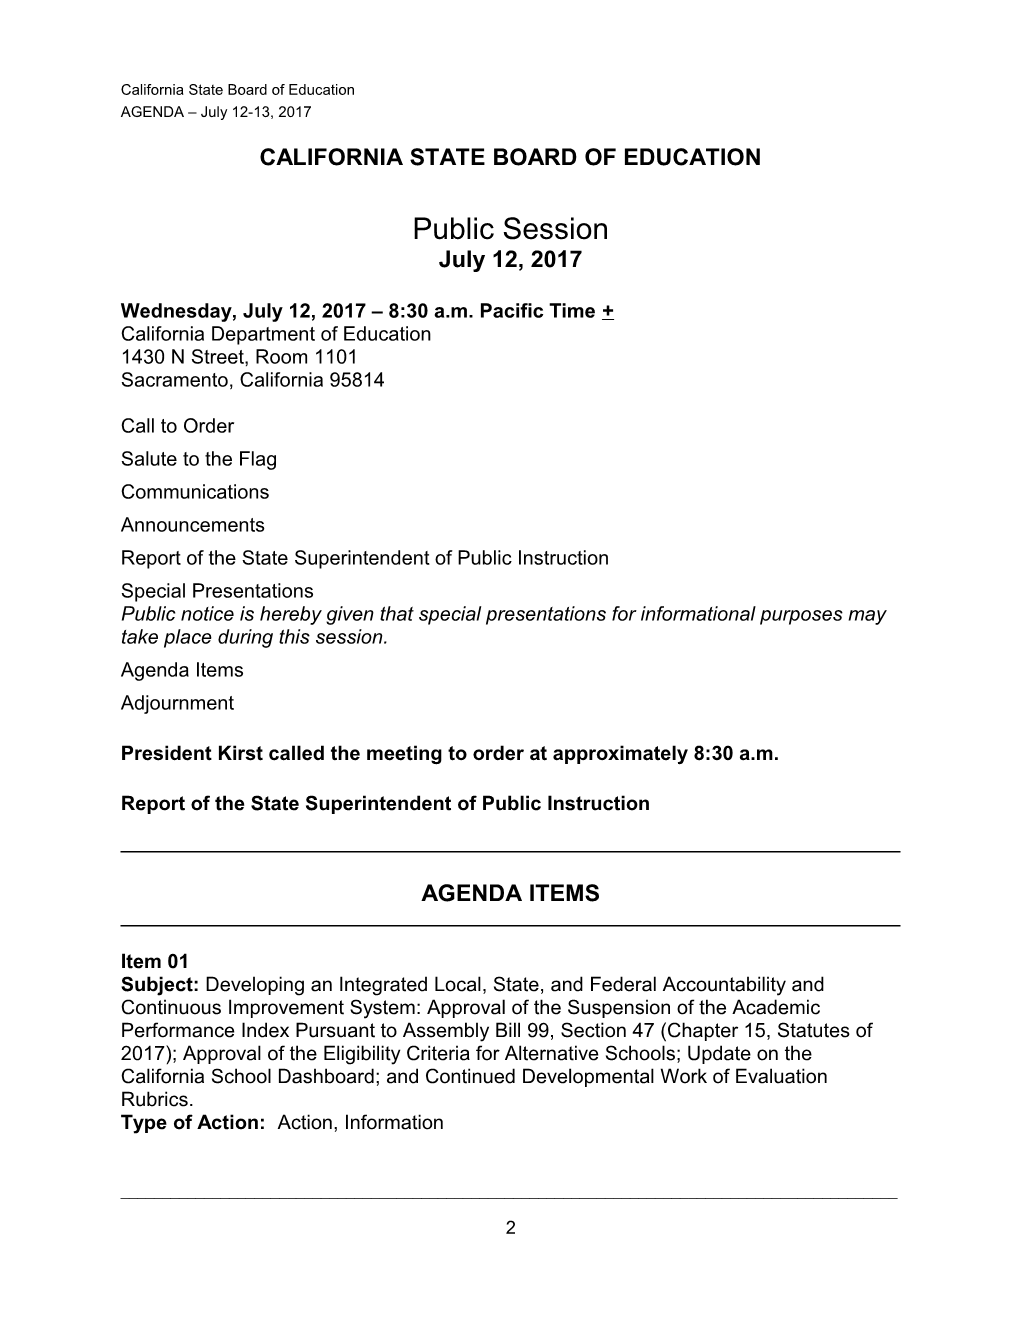 Final Minutes for July 2017 - SBE Minutes (CA State Board of Education)